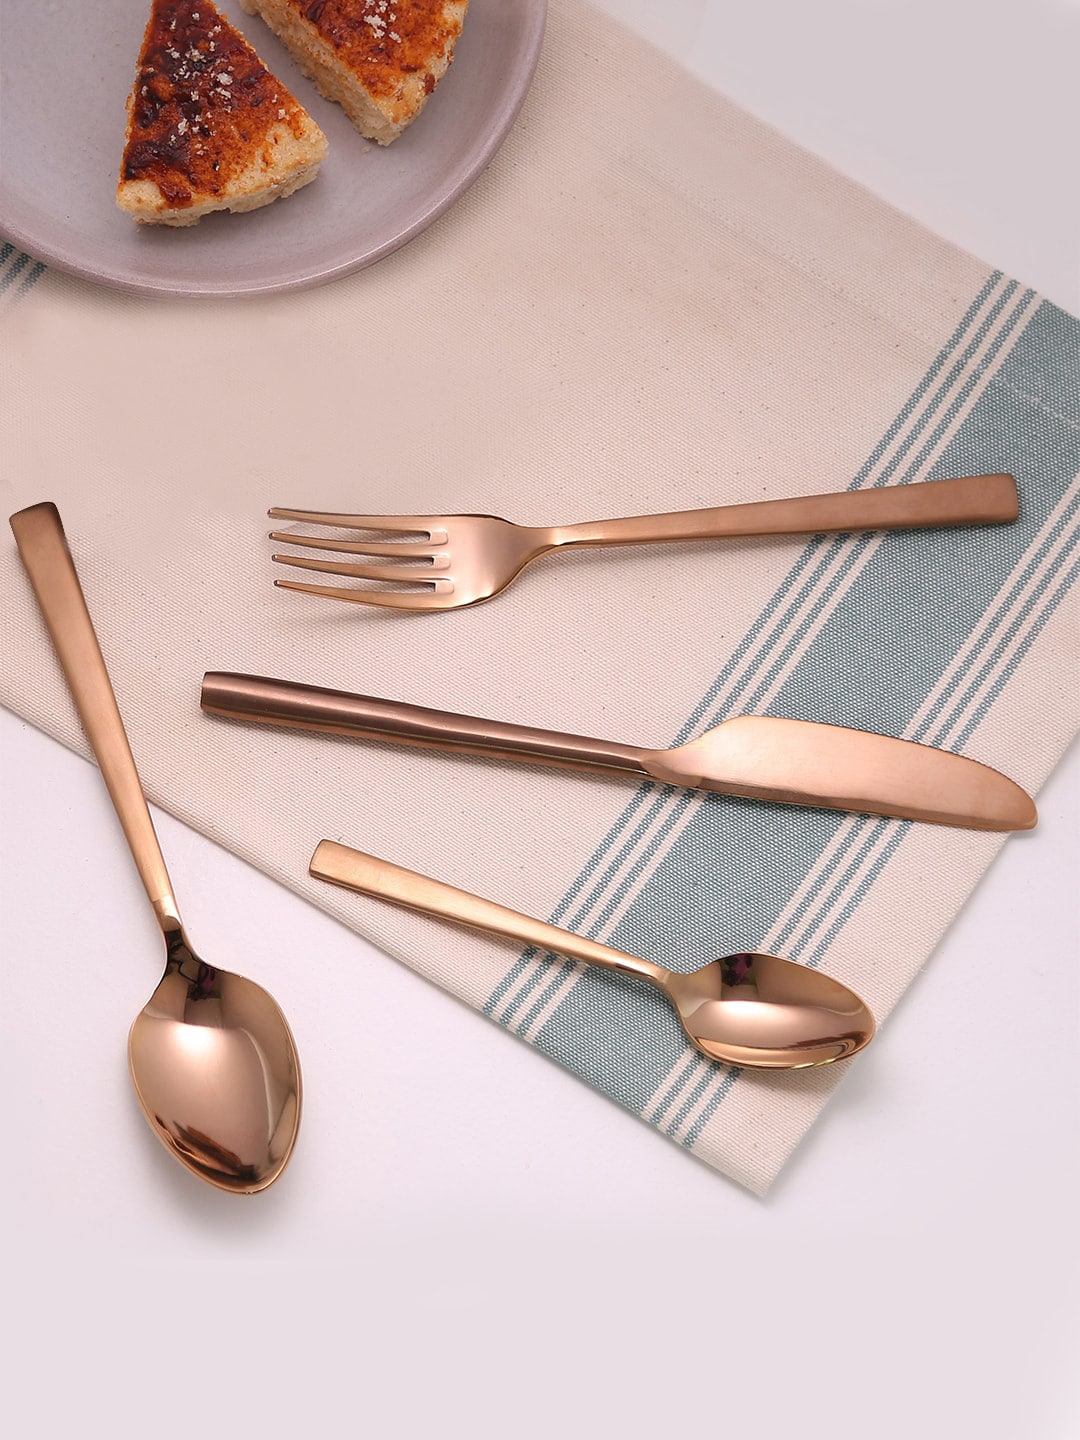 ellementry Set of 4 Gold-Toned Stainless Steel Enigma Cutlery Set Price in India